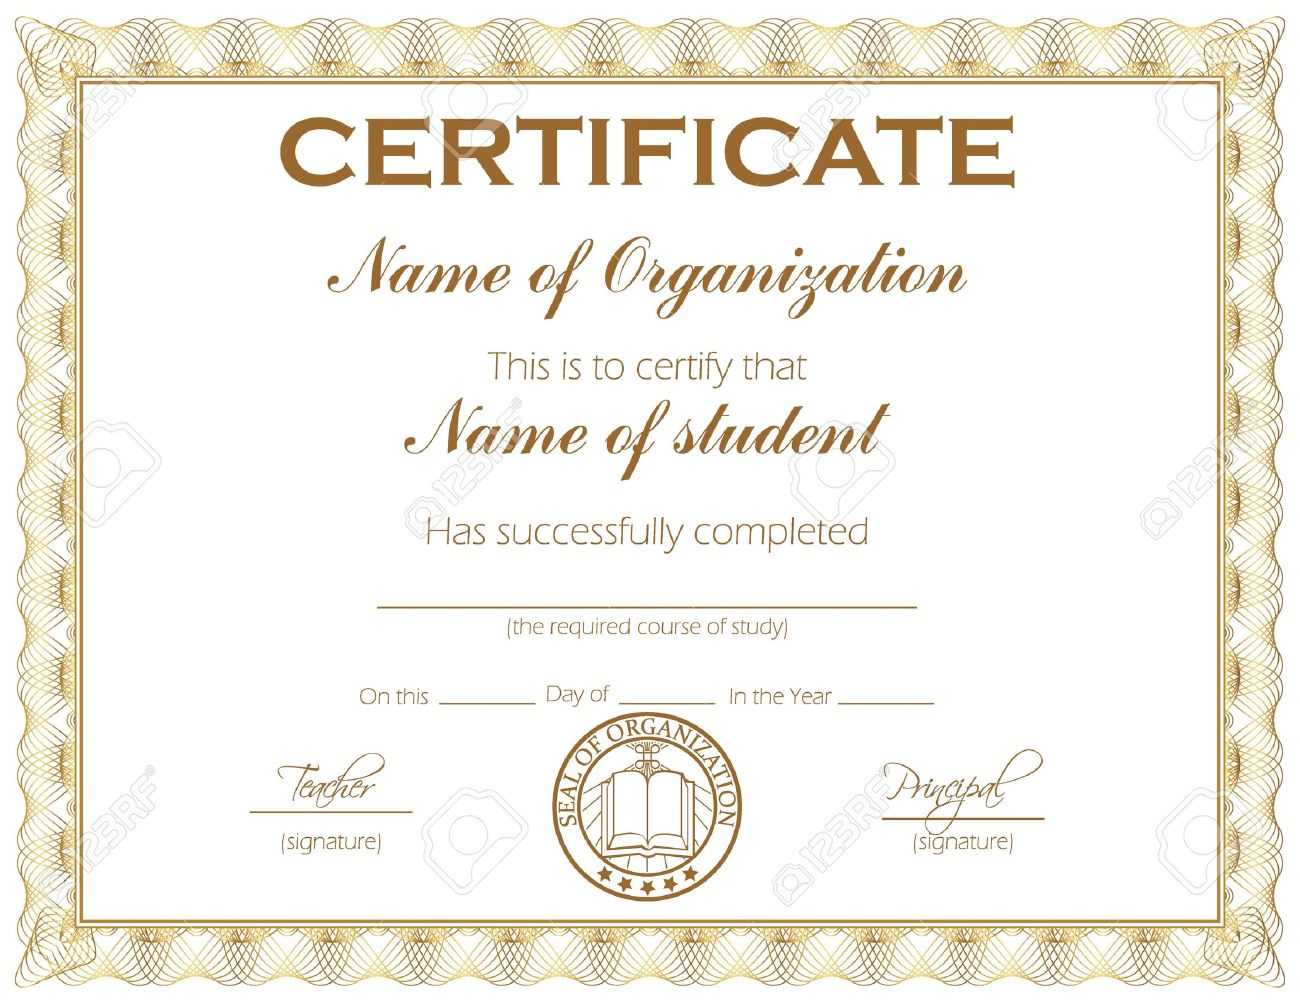 General Purpose Certificate Or Award With Sample Text That Can.. For Sales Certificate Template